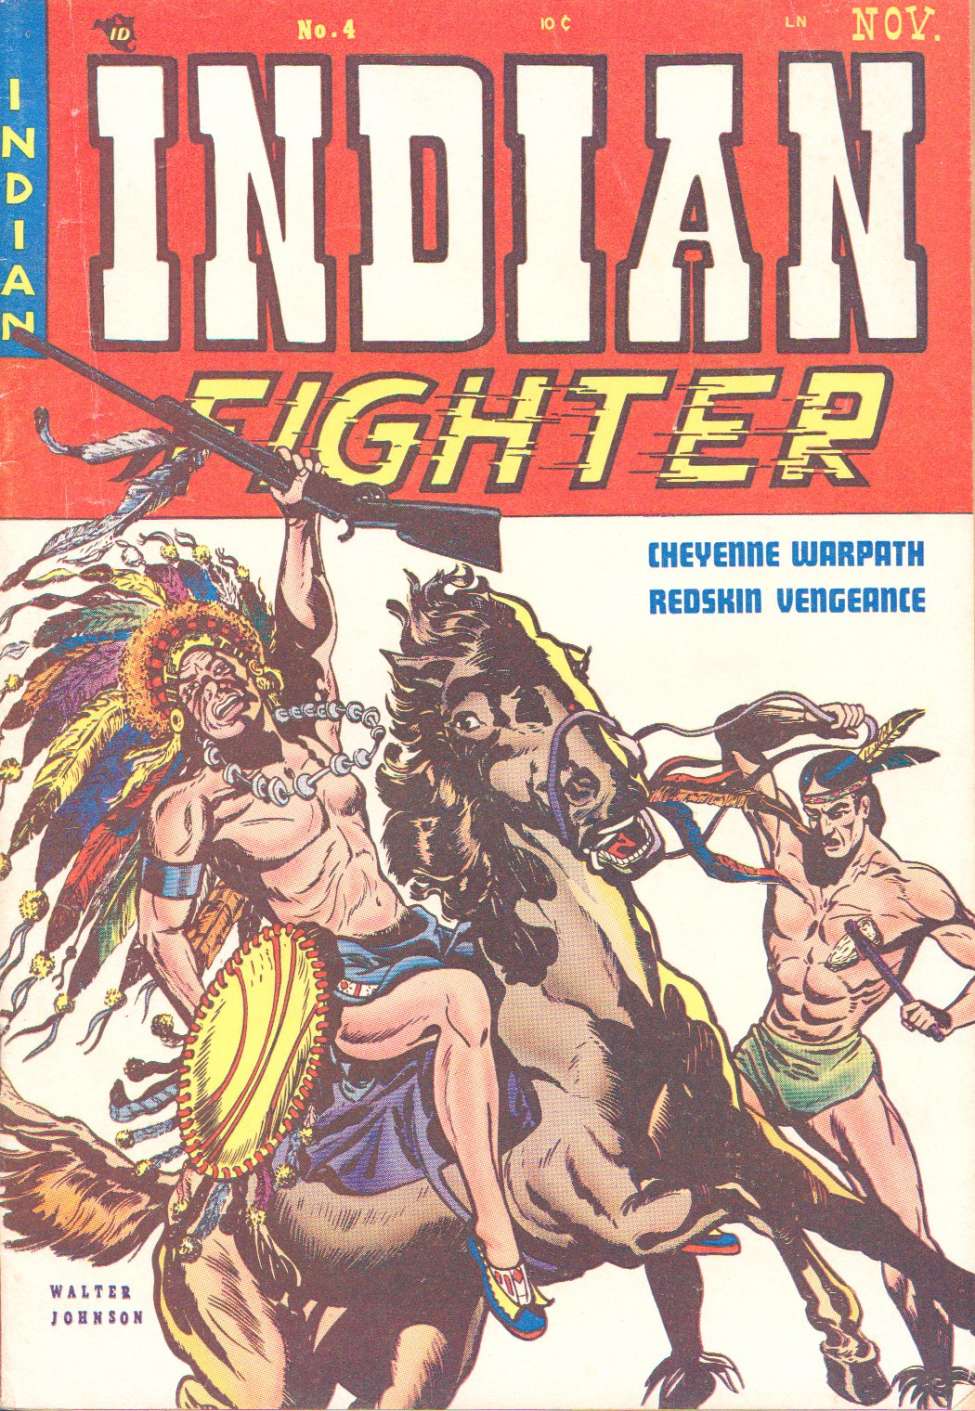 Comic Book Cover For Indian Fighter 4